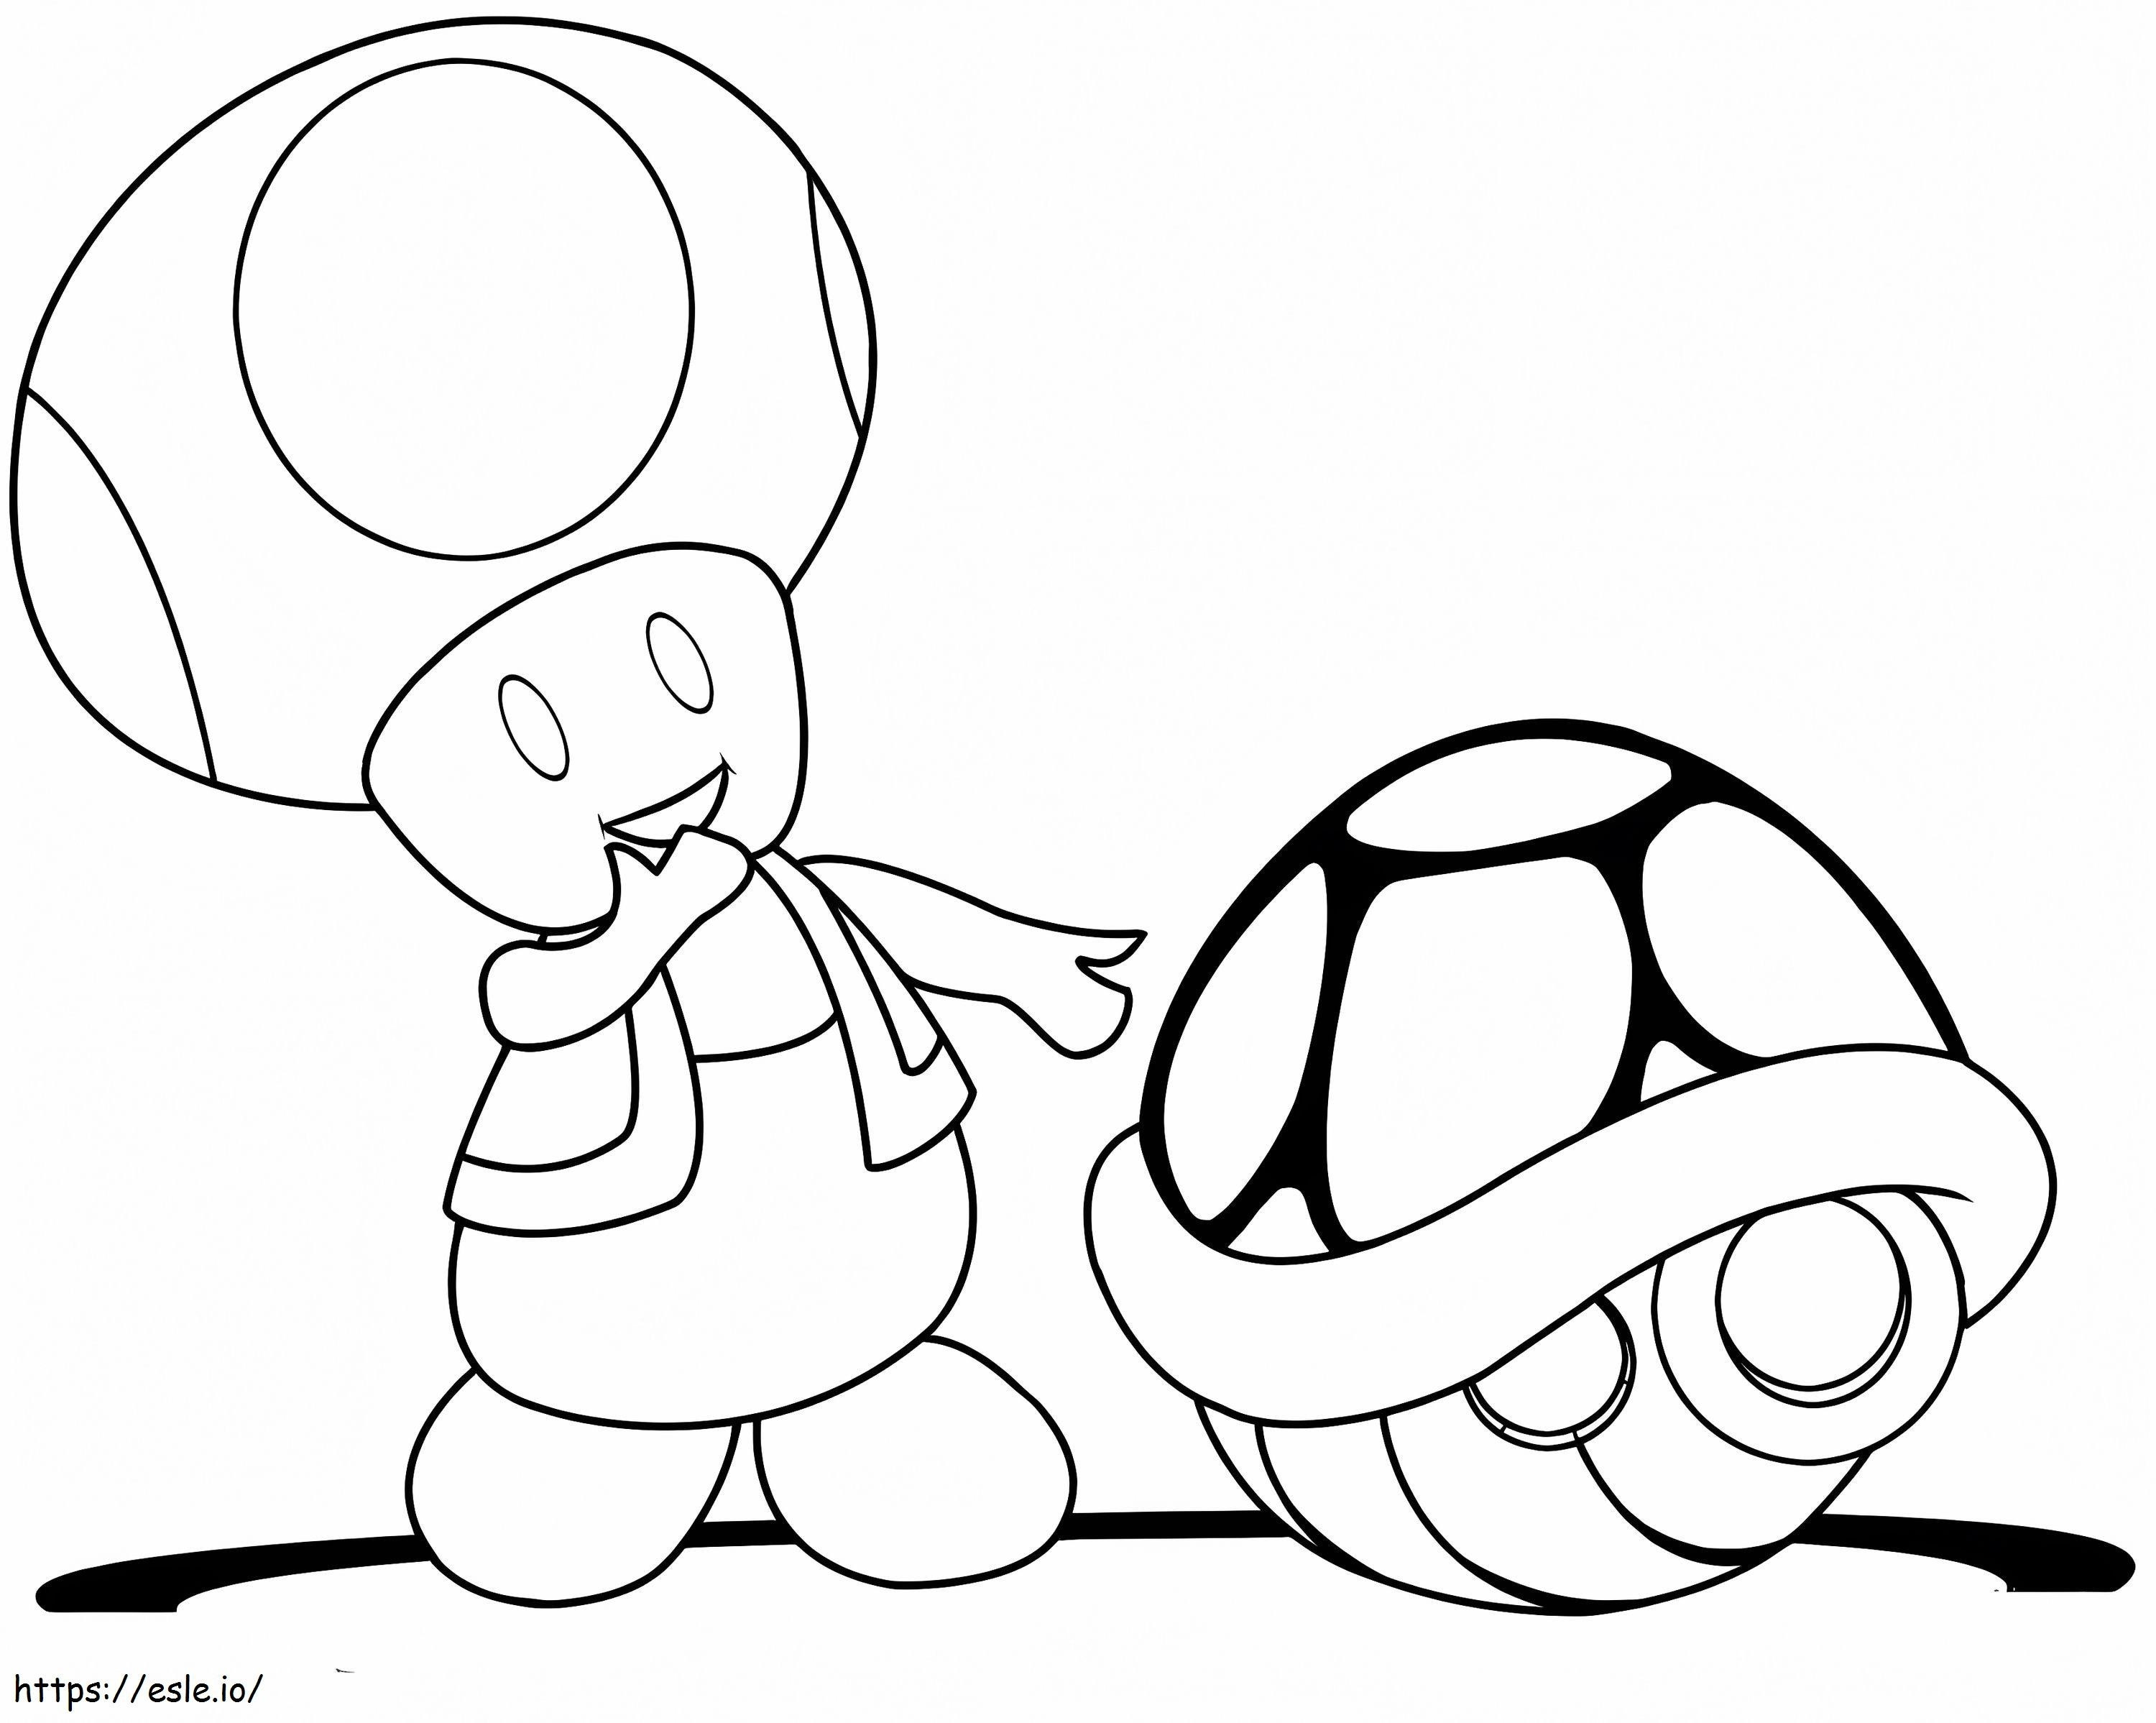 Toad With Green Shell coloring page